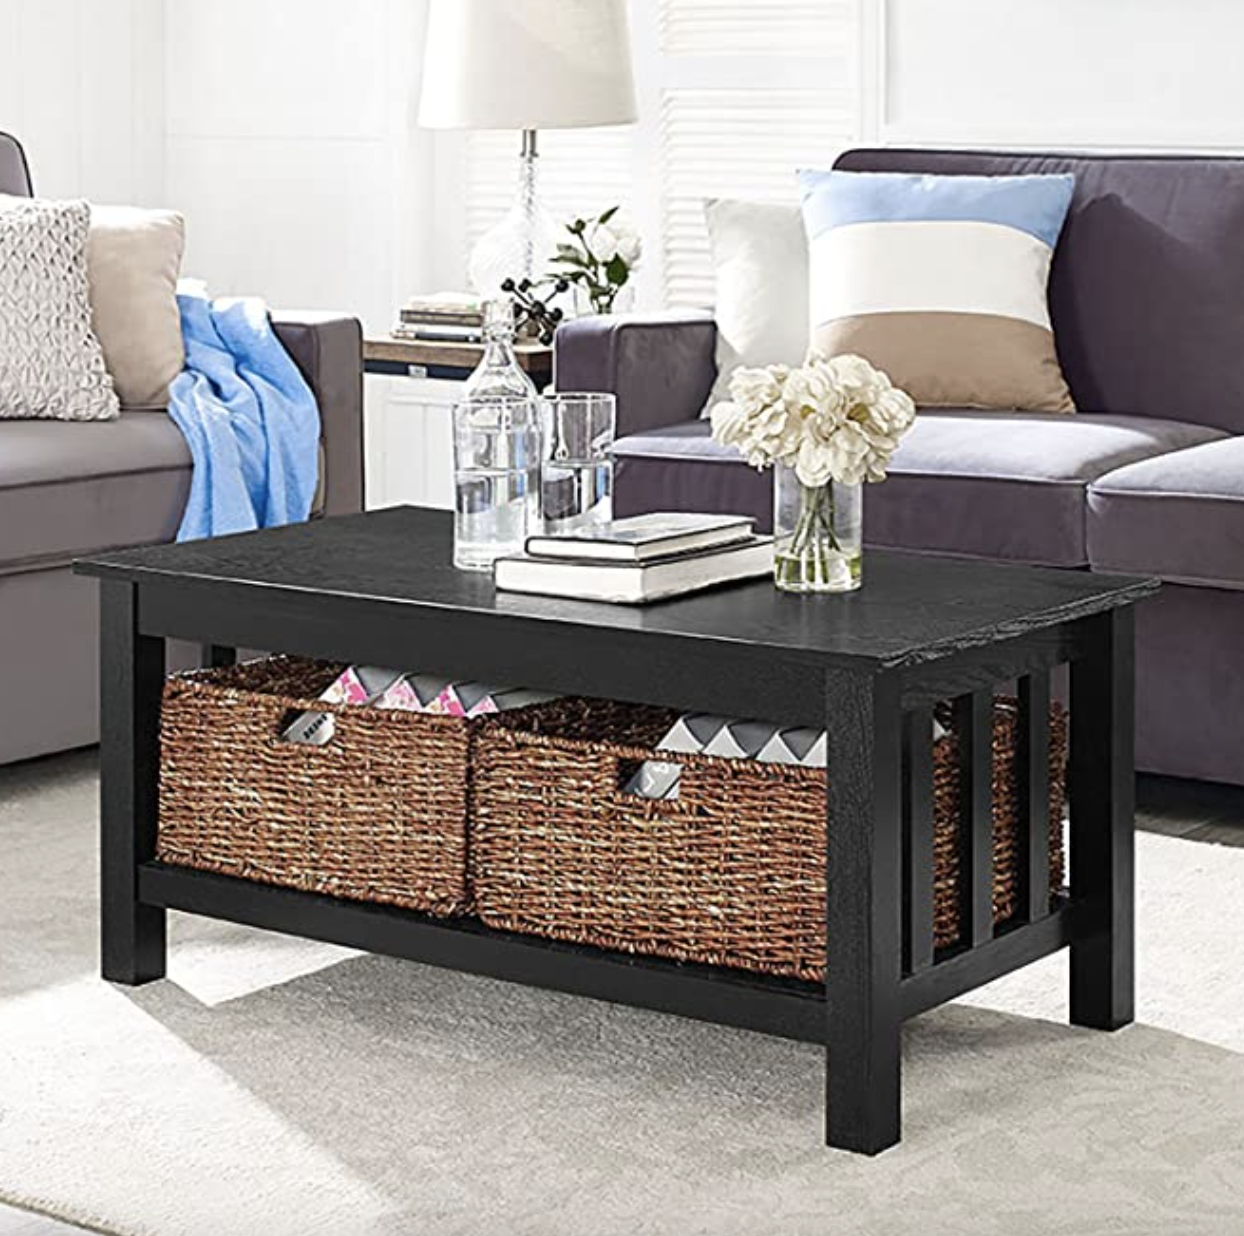 The black coffee table with two wicker baskets in the bottom shelf